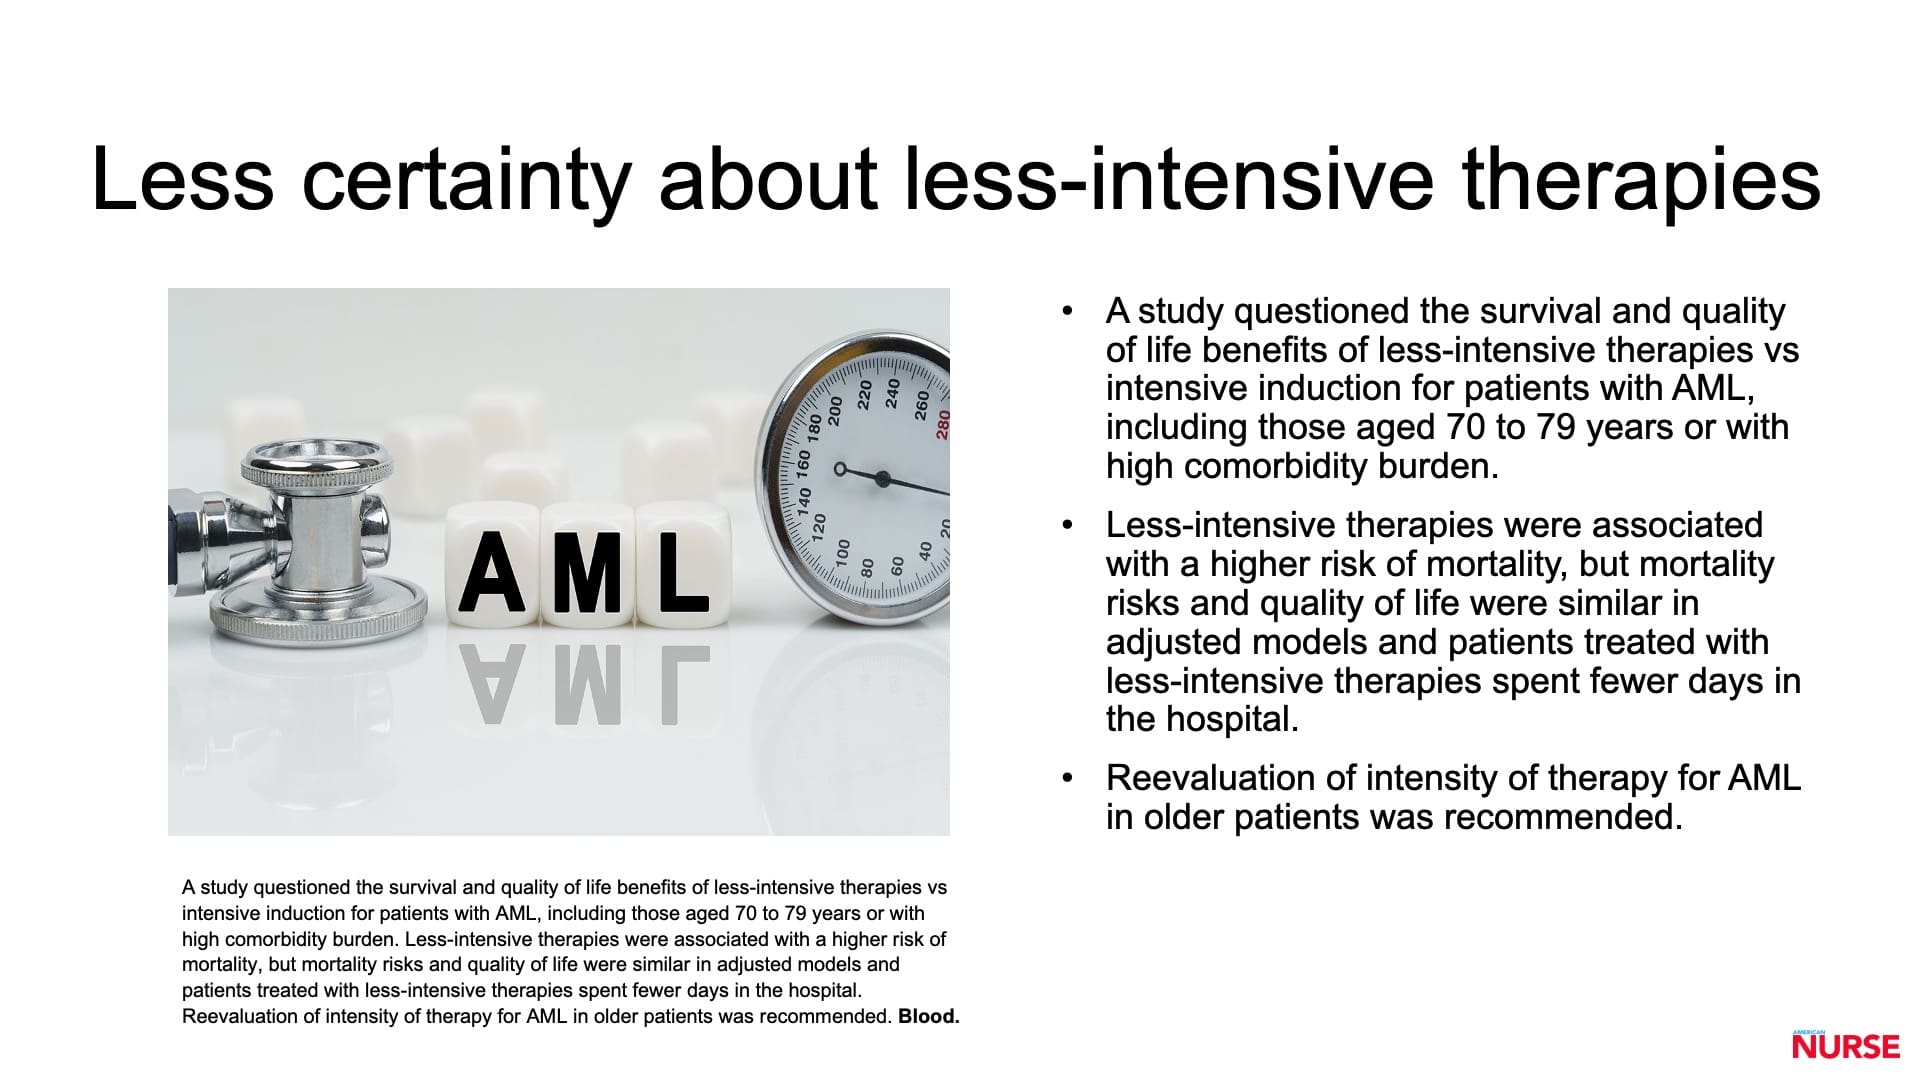 less certainty about less-intensive therapies